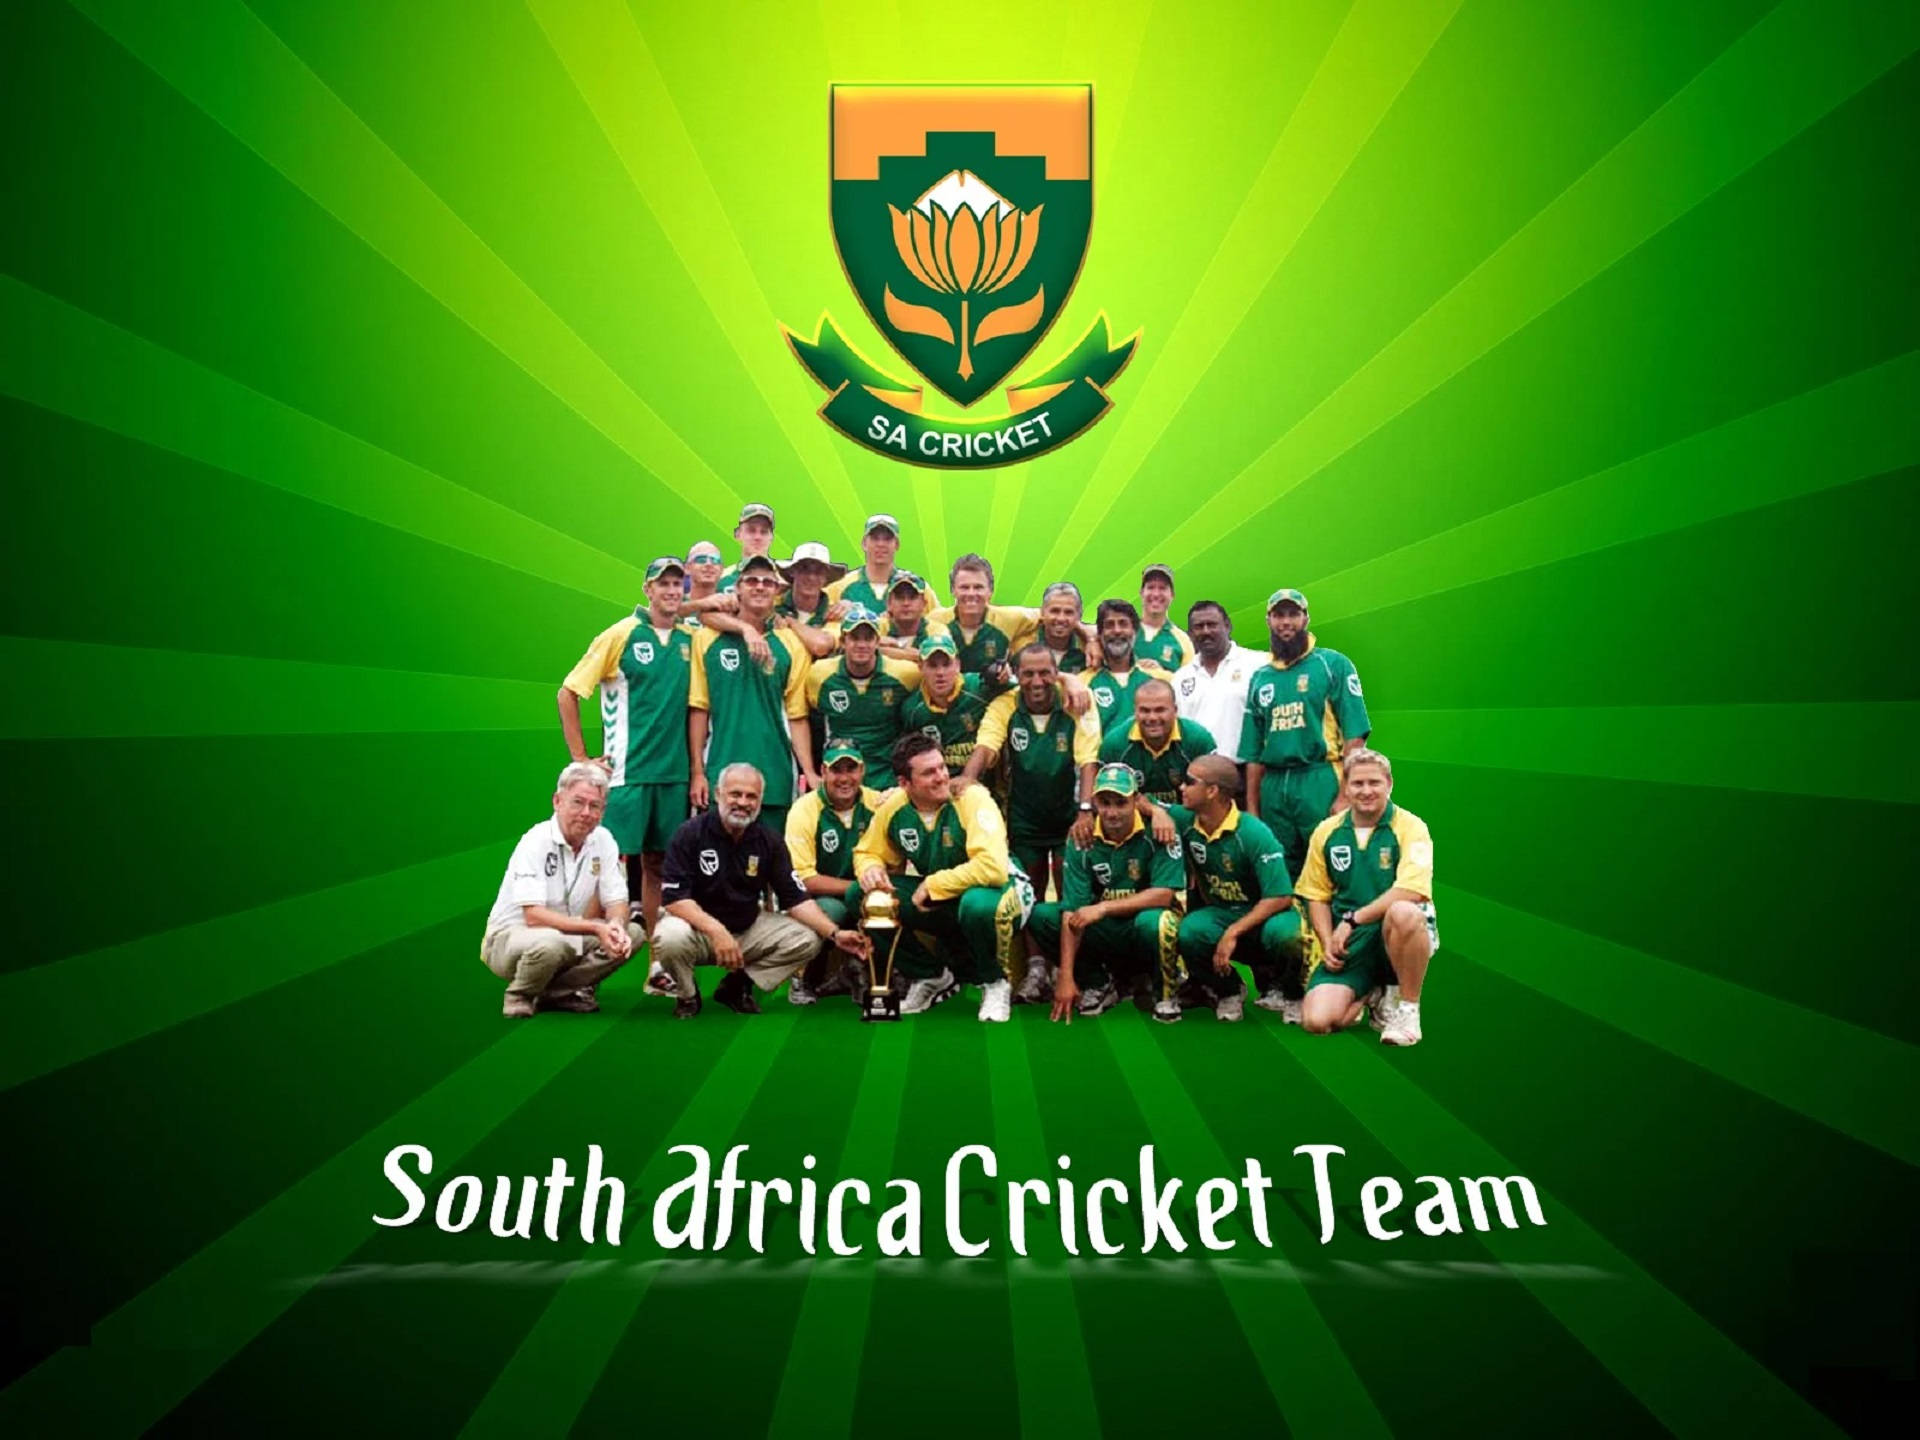 South Africa Cricket Baseball Group Background